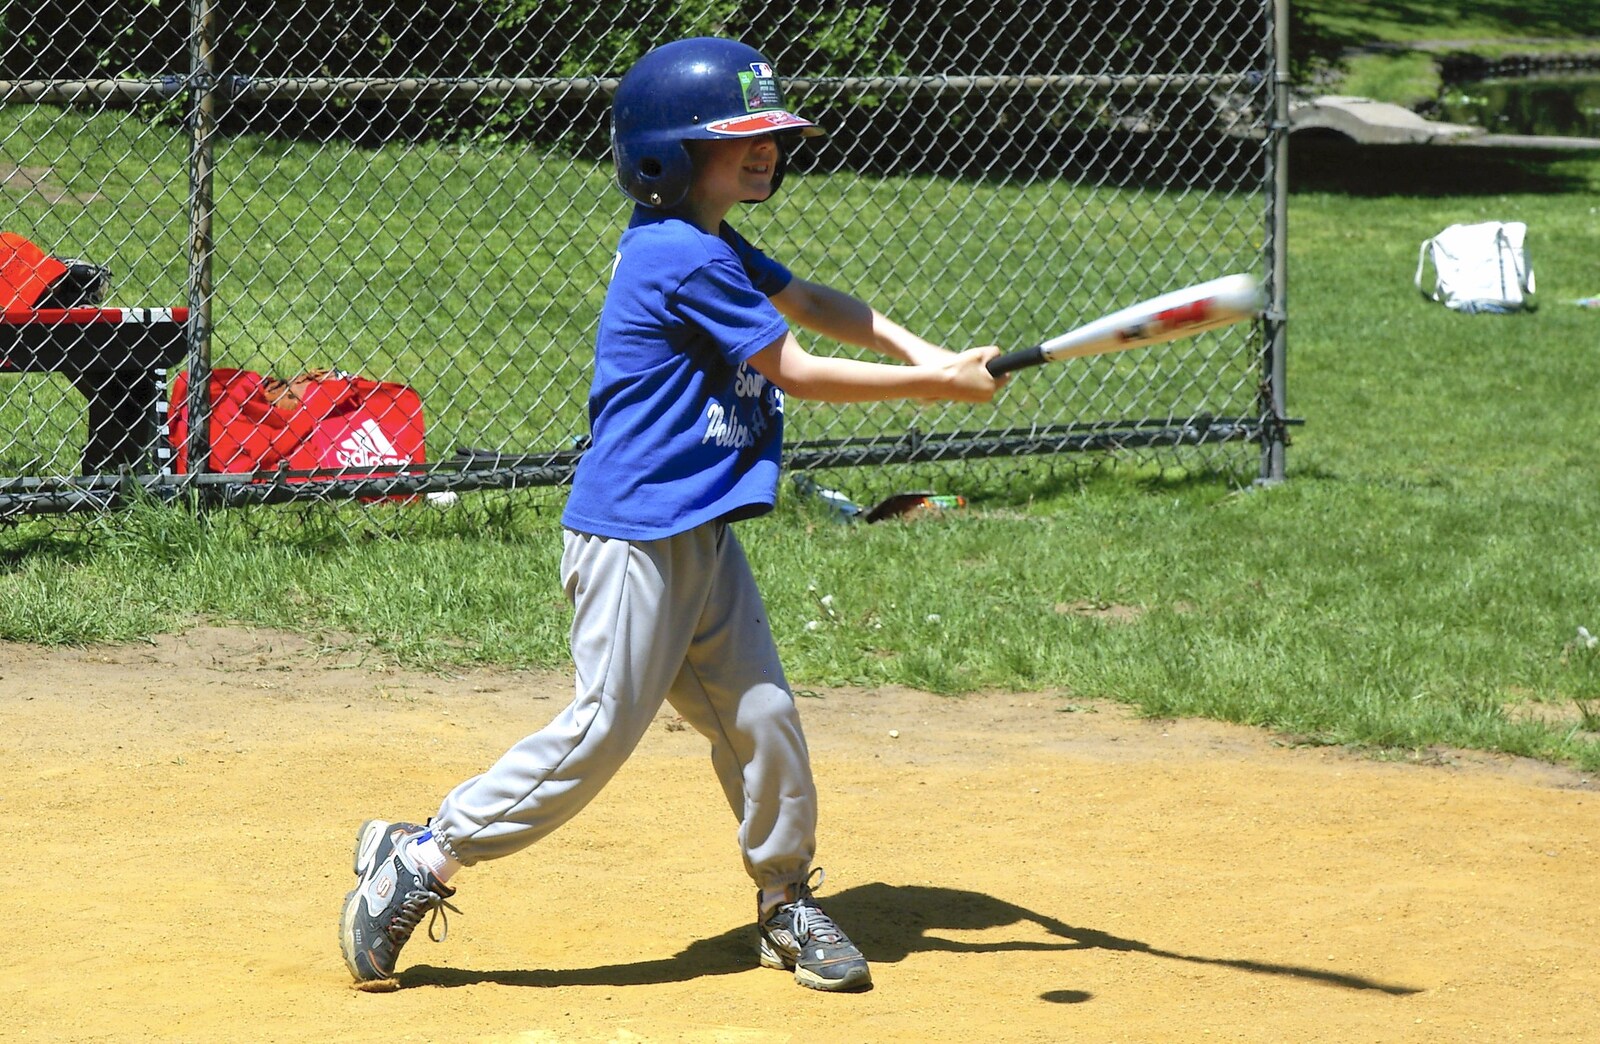 Kai swings out from Maplewood and Little-League Baseball, New Jersey - 29th April 2006